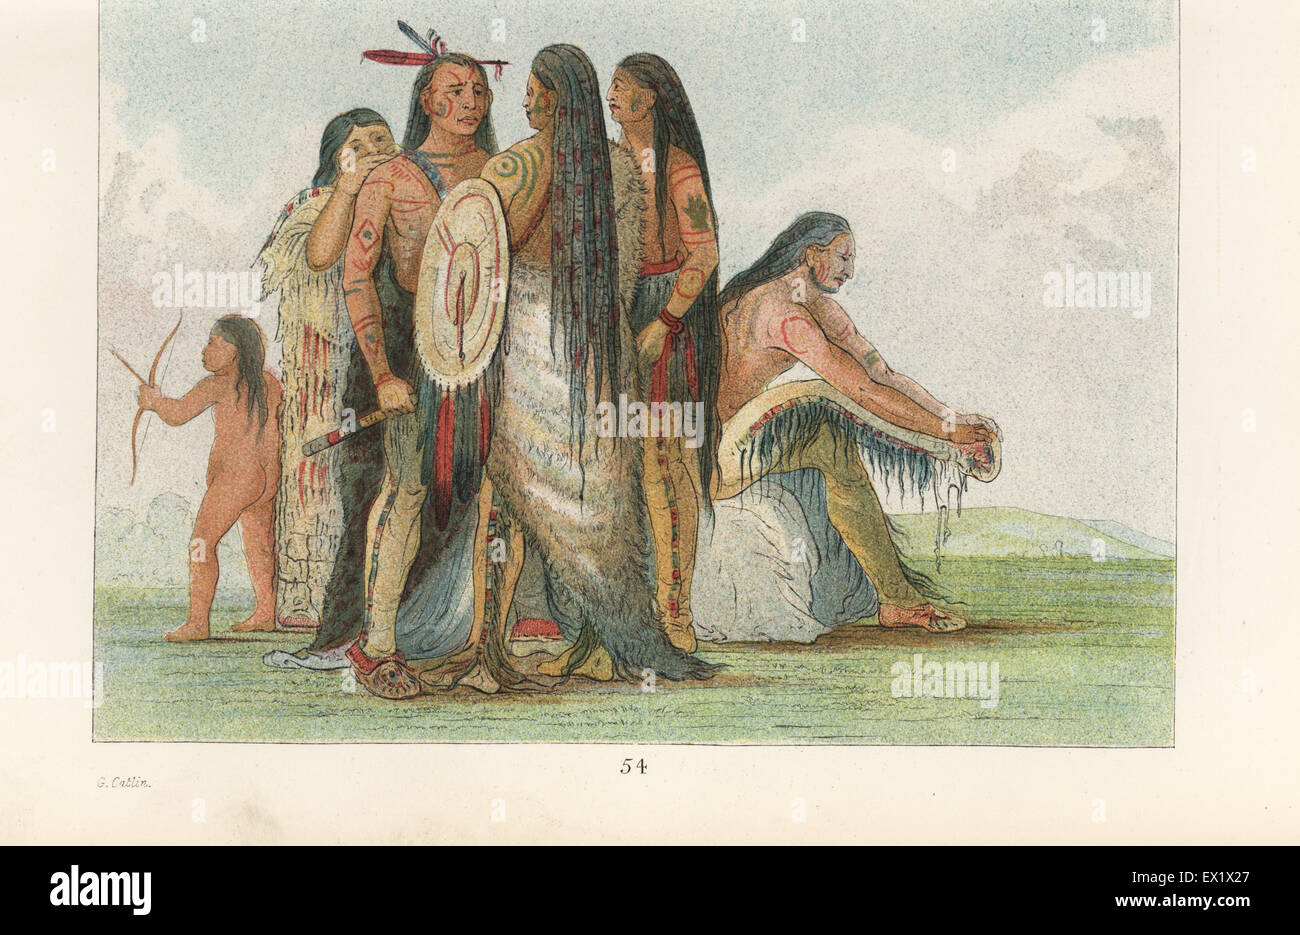 Mandan warrior San-ja-ka-ko-kah, Deceiving Wolf, and his family, showing the distinctive long hair dyed red and falling almost to the knees. Handcoloured lithograph from George Catlin's Manners, Customs and Condition of the North American Indians, London, 1841. Stock Photo